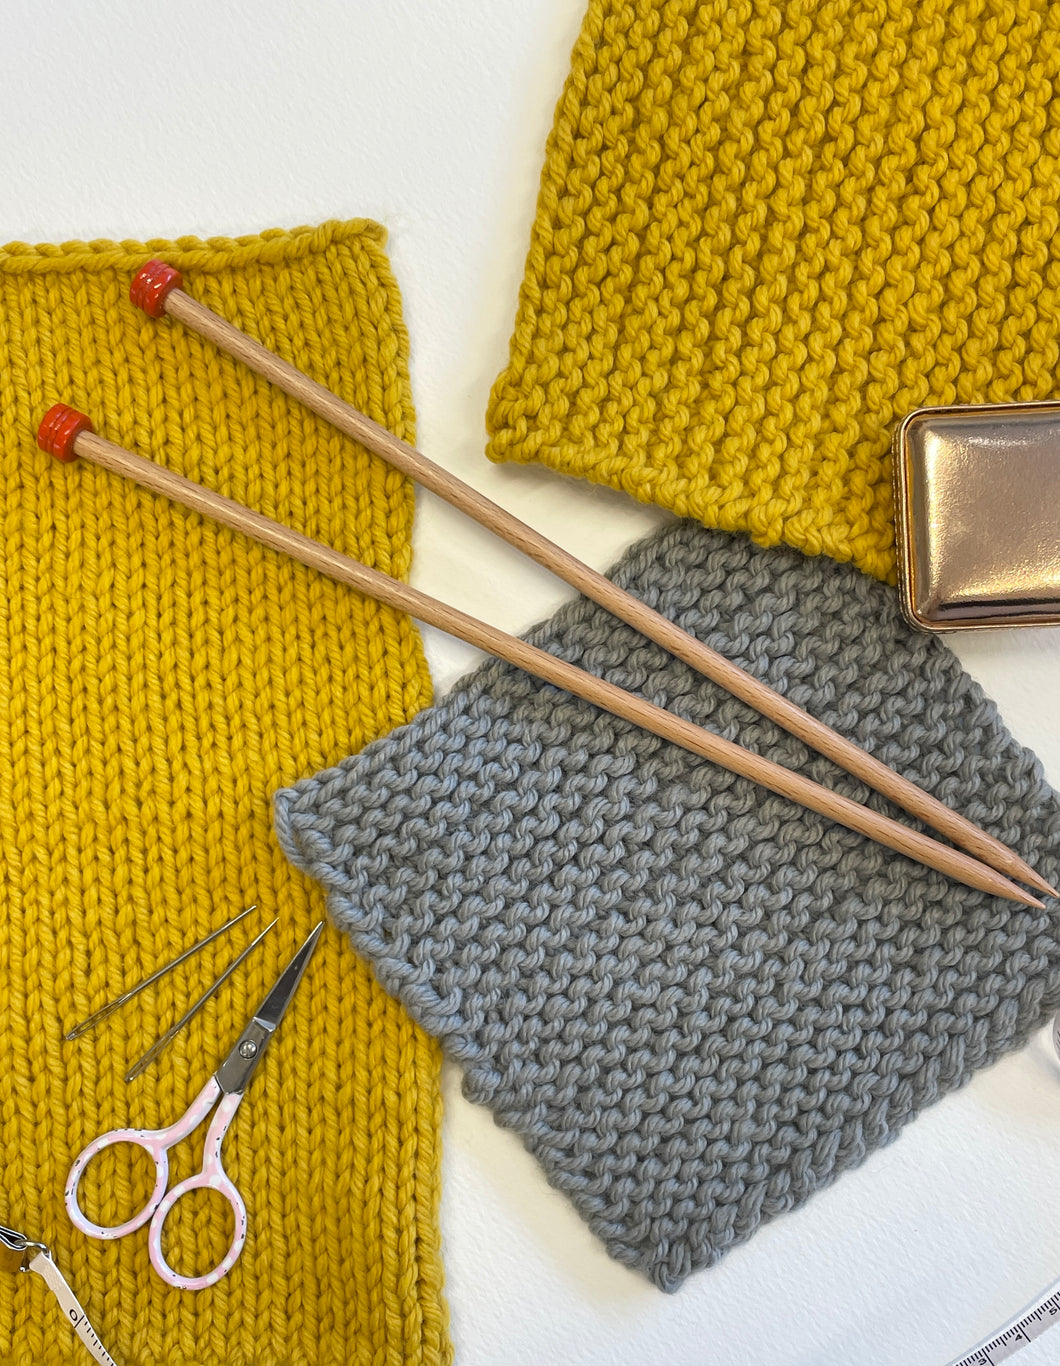 How to Knit Workshop